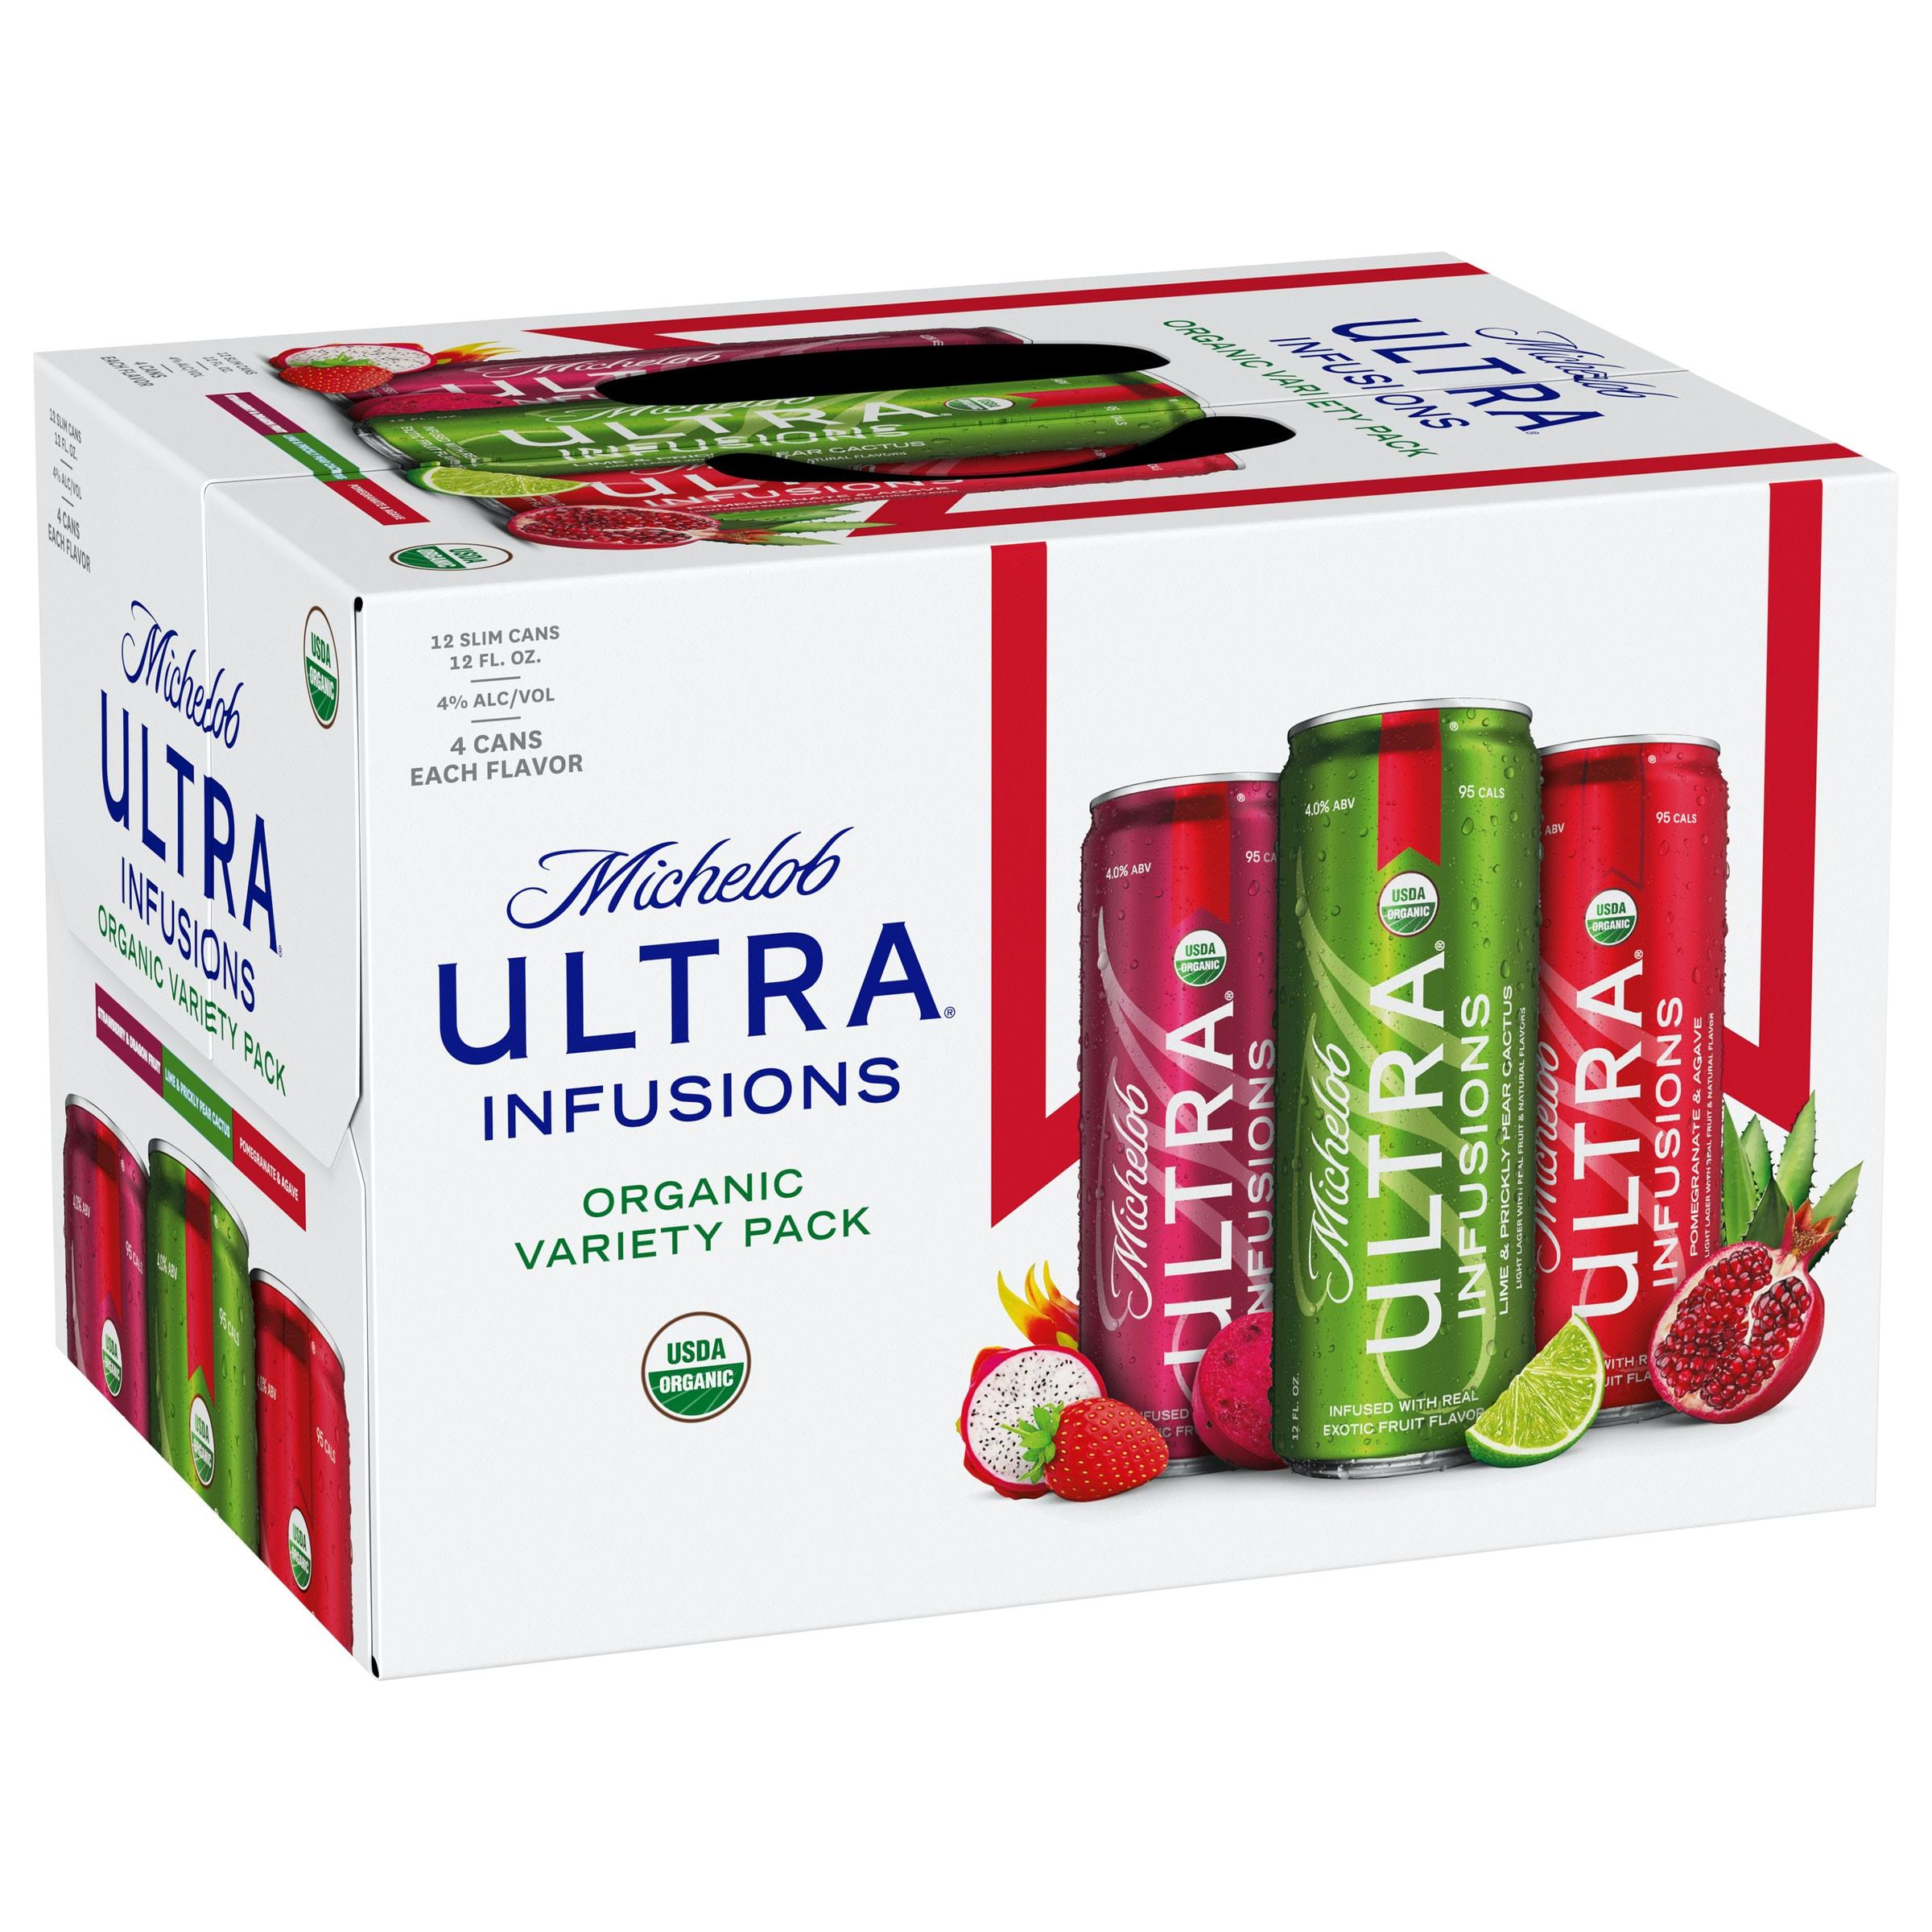 Michelob Ultra Beer, Superior Light, Organic Pack, 12 Pack - 12 pack, 12 fl oz cans